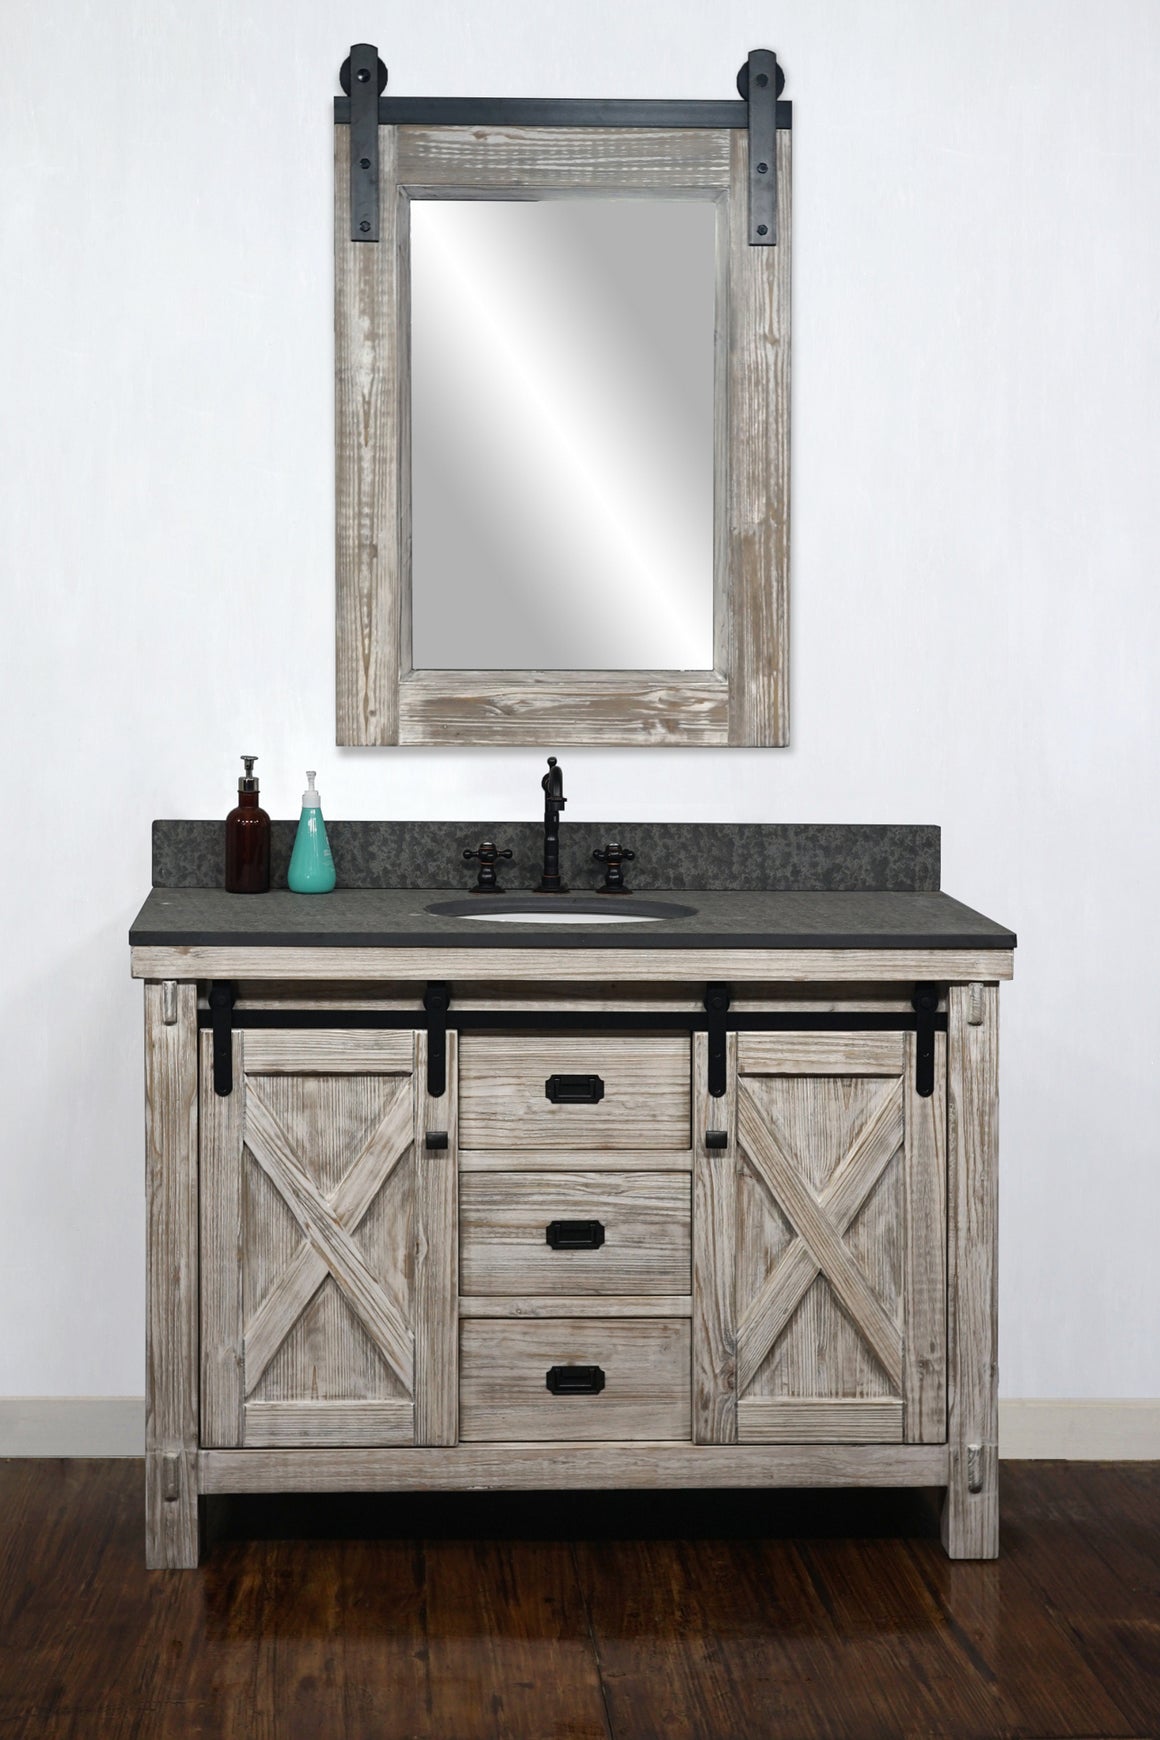 48"RUSTIC SOLID FIR BARN DOOR STYLE SINGLE SINK VANITY IN WHITE WASH WITH RUSTIC STYLE POLISHED TEXTURED SURFACE GRANITE TOP IN MATTE GREY-NO FAUCET